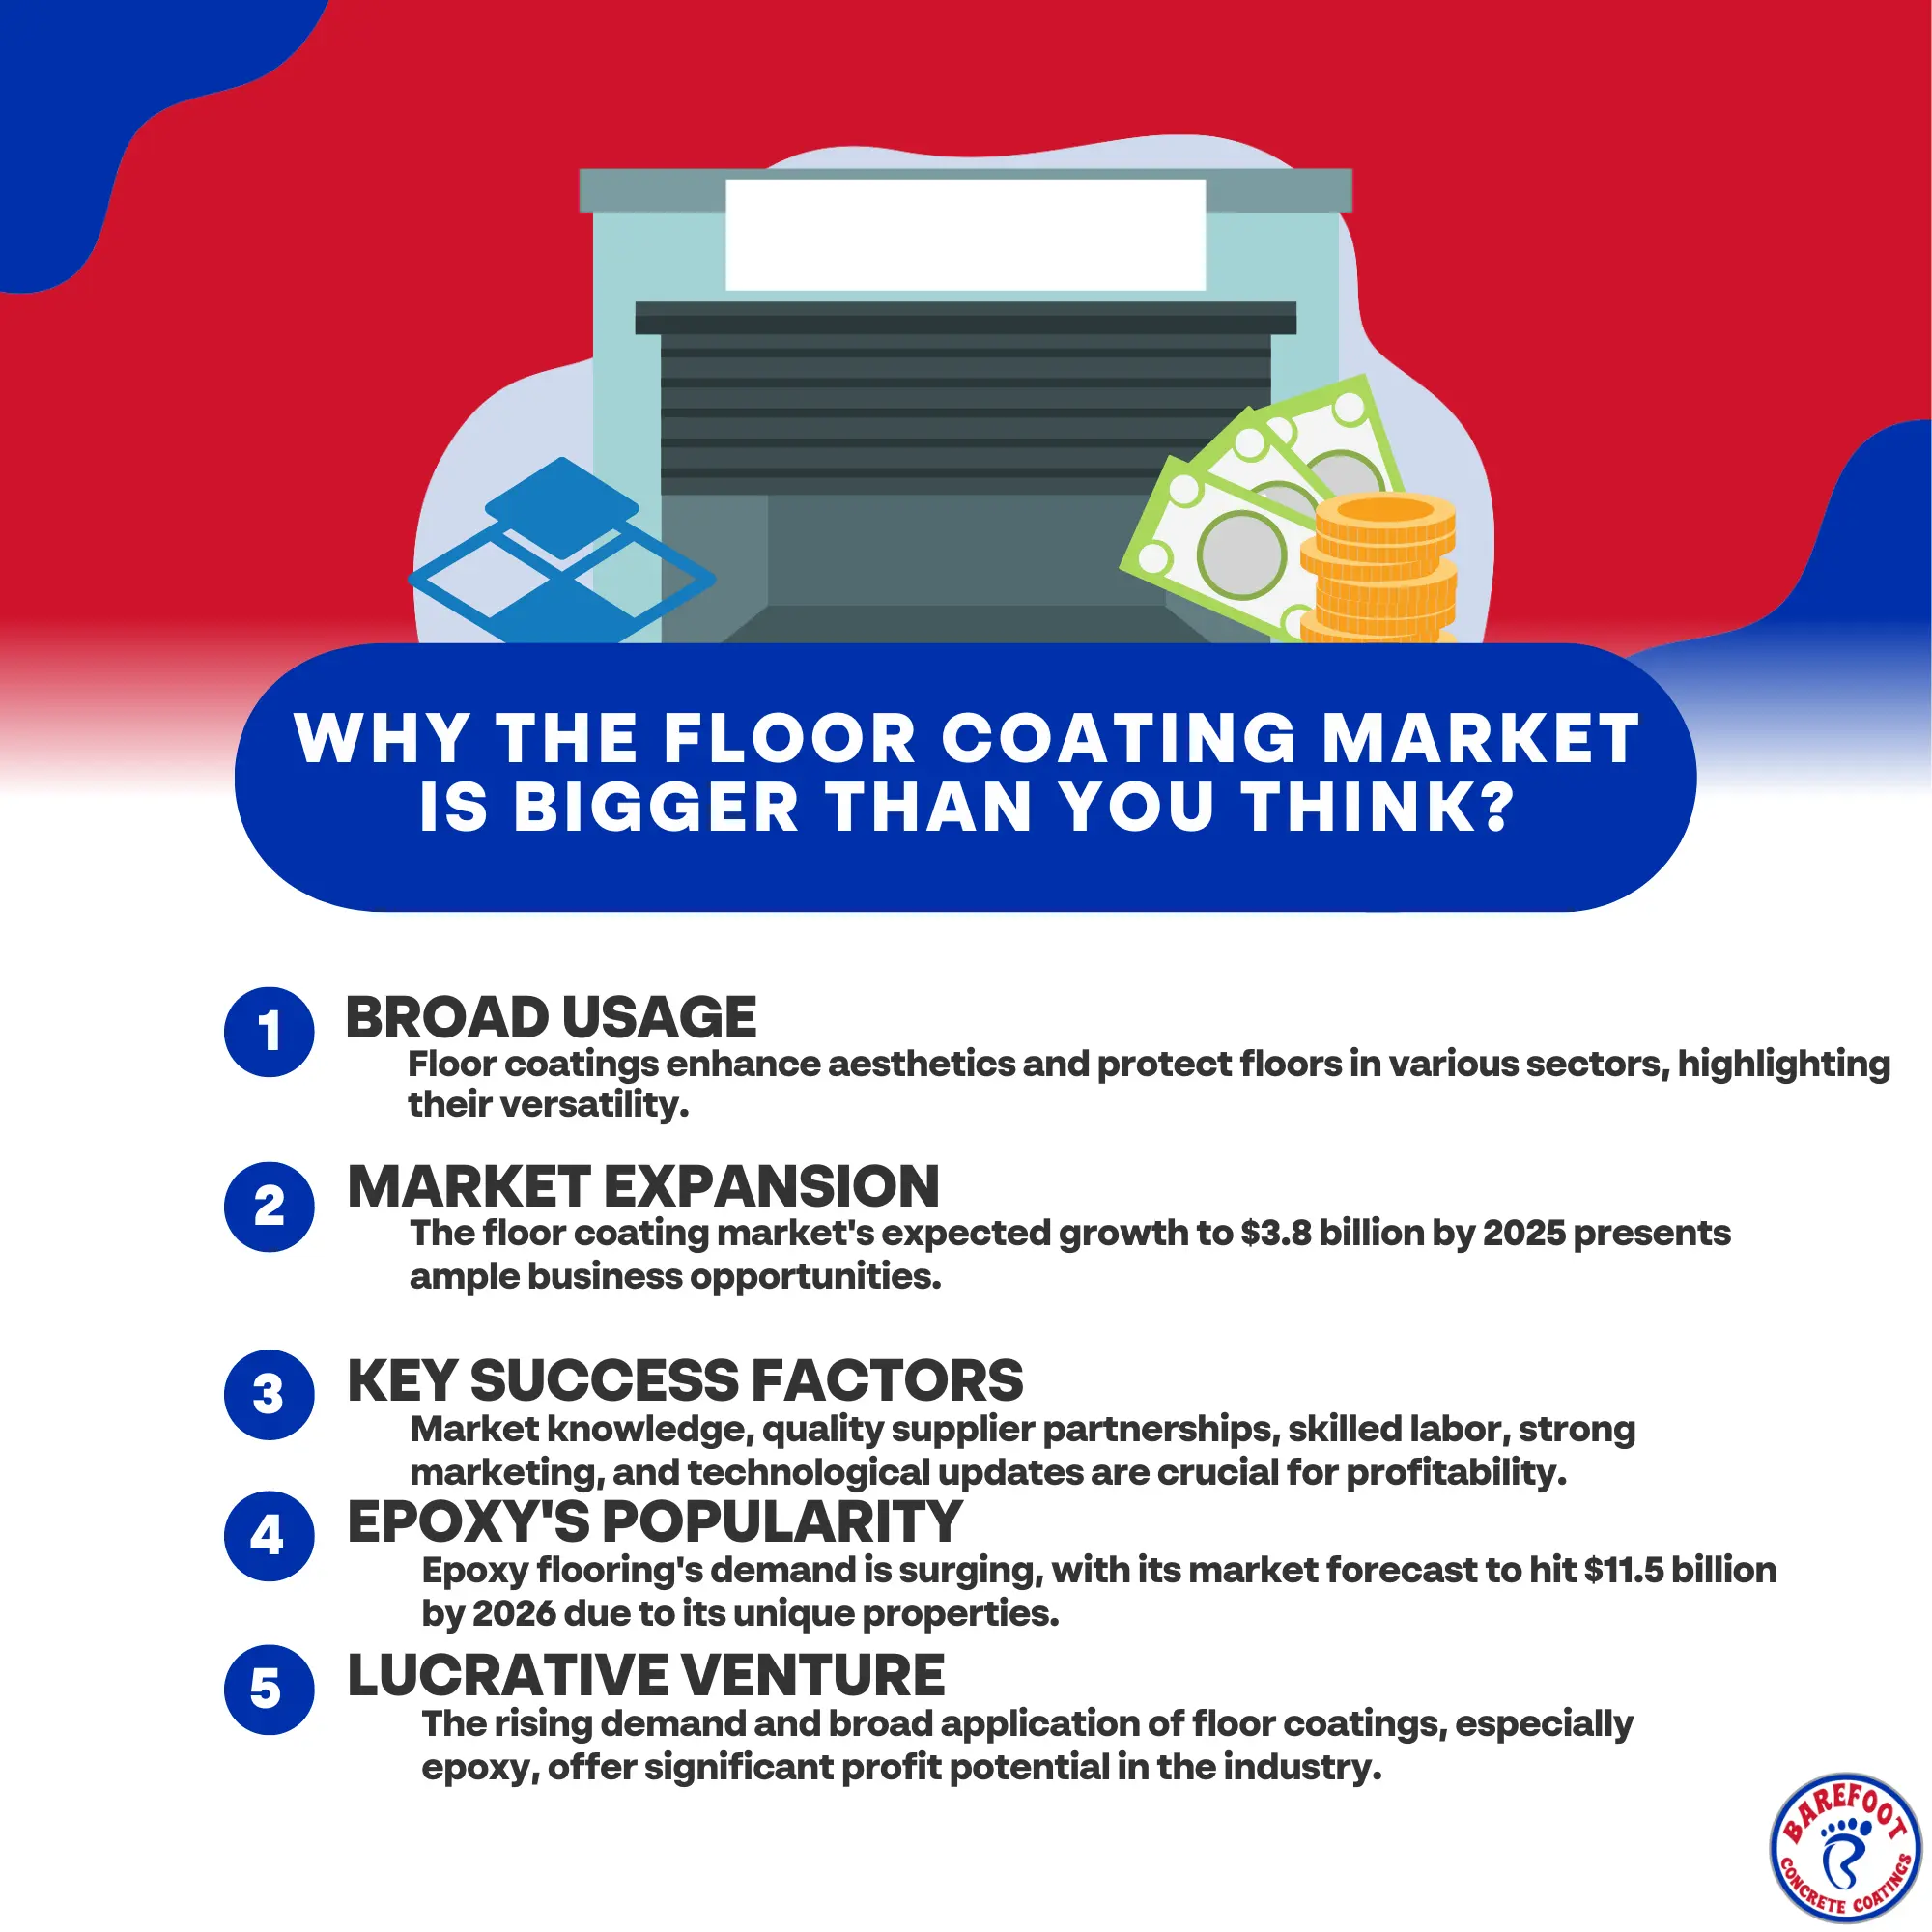 Why the Floor Coating Market is Bigger Than You Think?